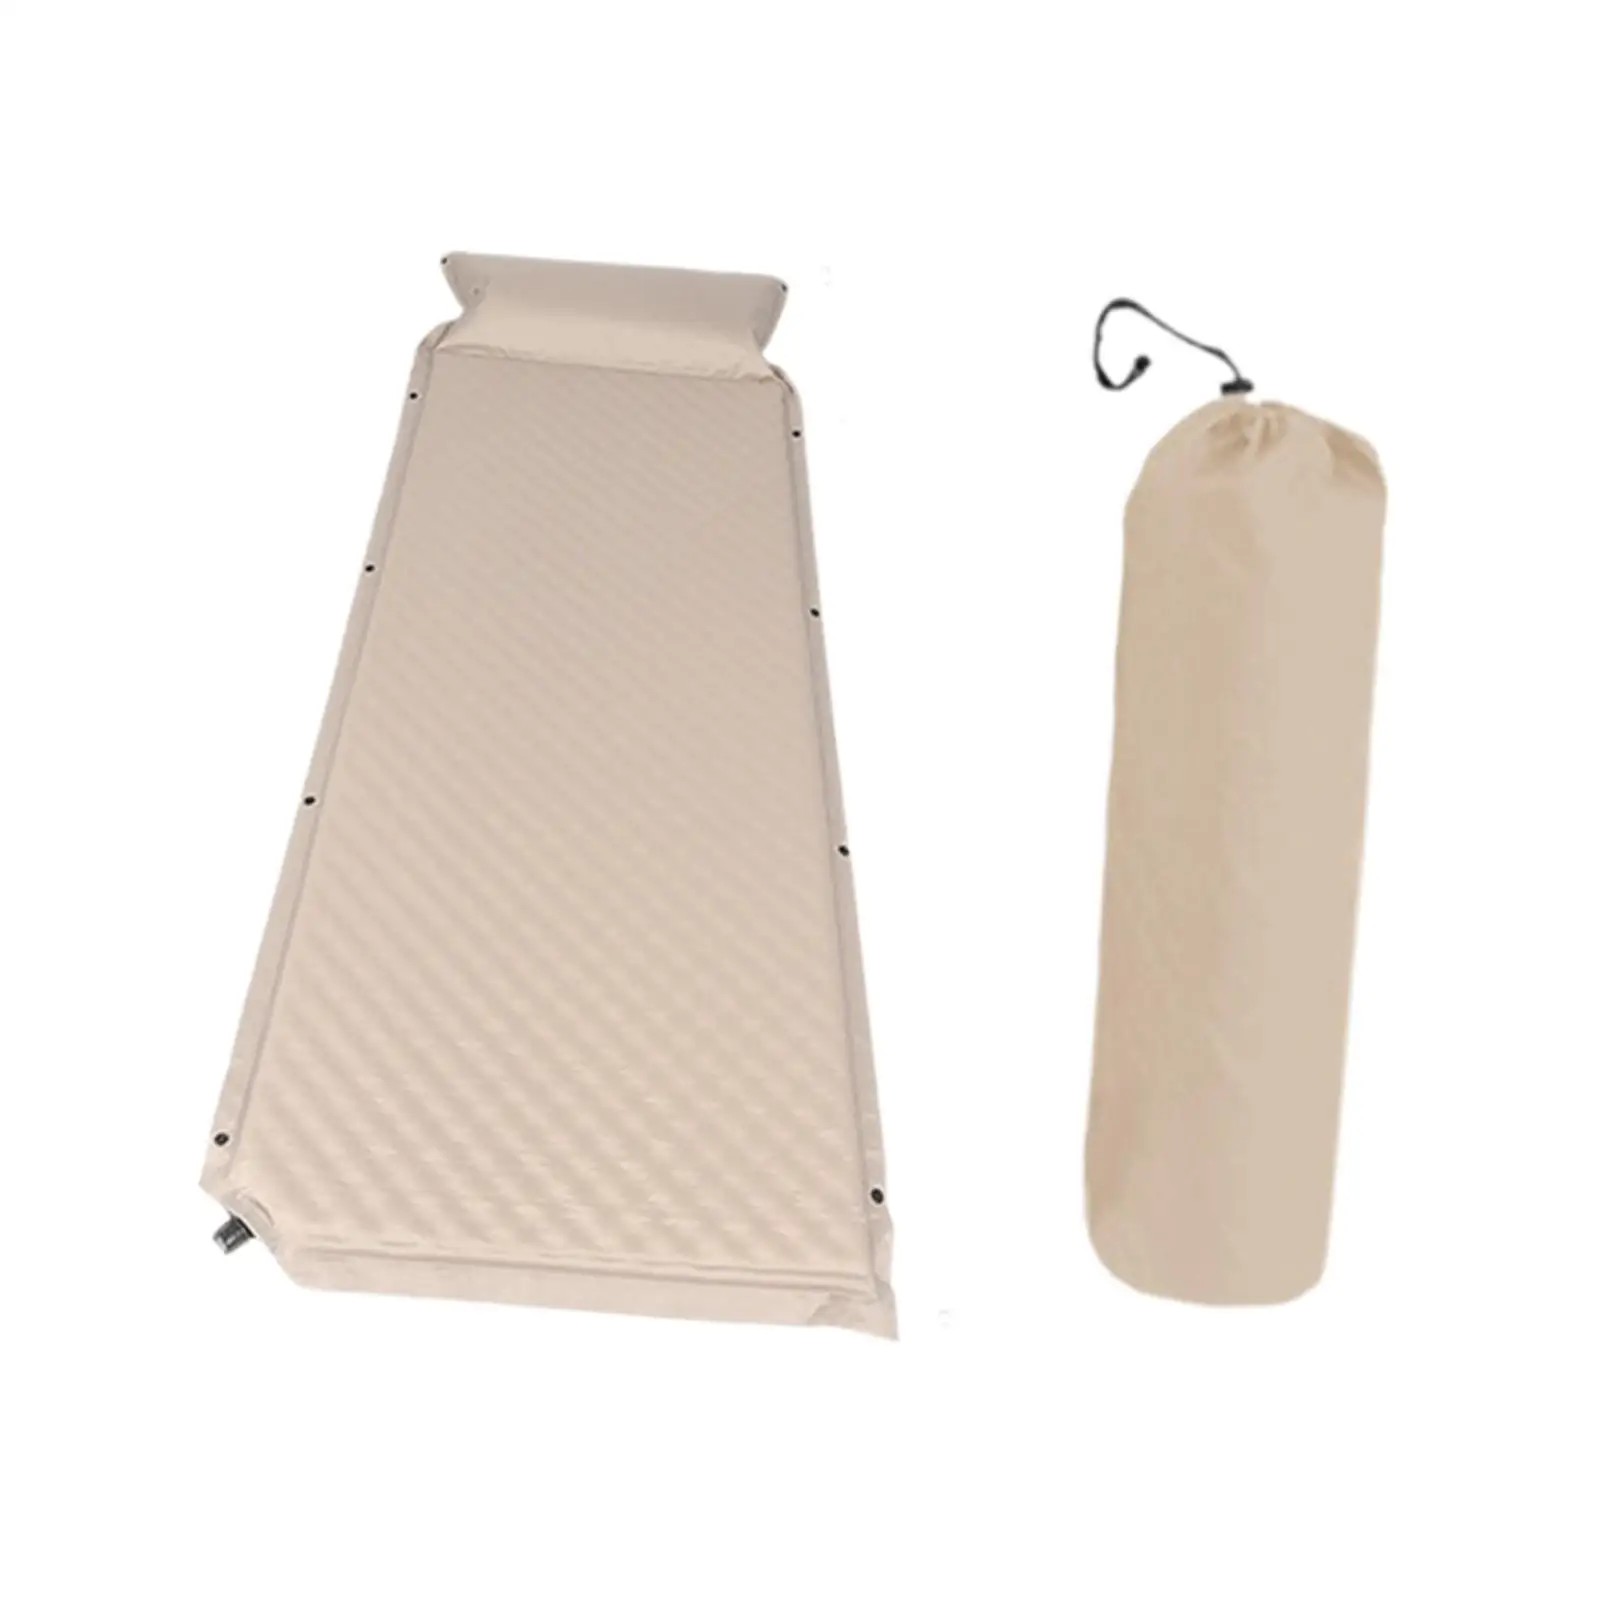 Automatic Inflatable Mattress Self Inflating Air Mattress for Travel Outdoor